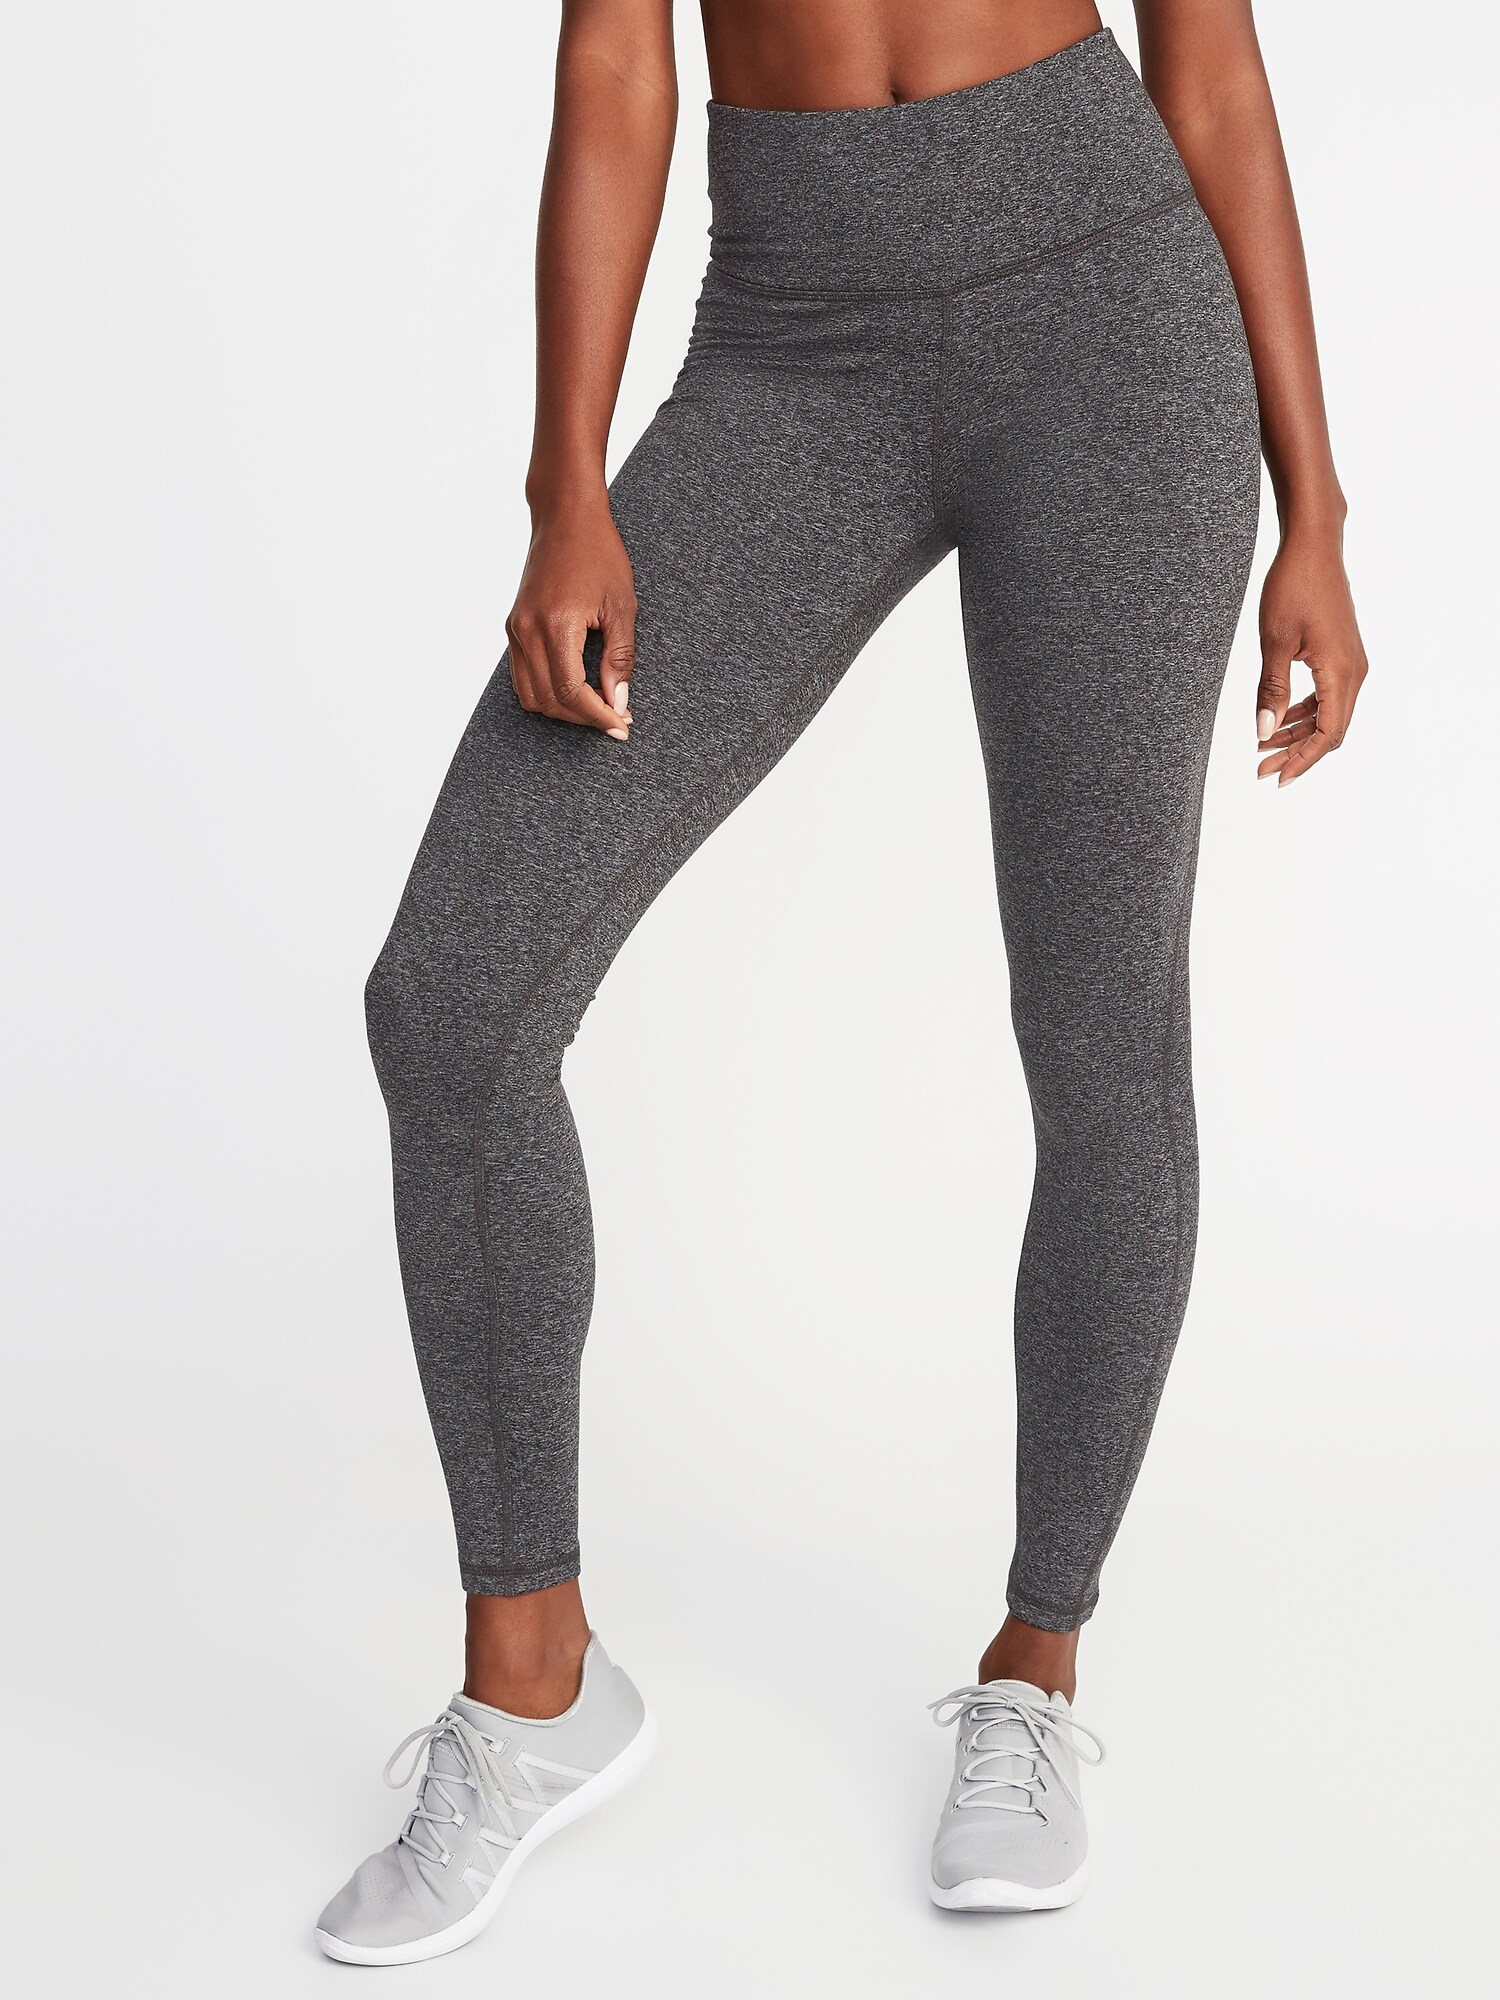 High-Waisted Soft-Brushed Elevate Compression Leggings For Women